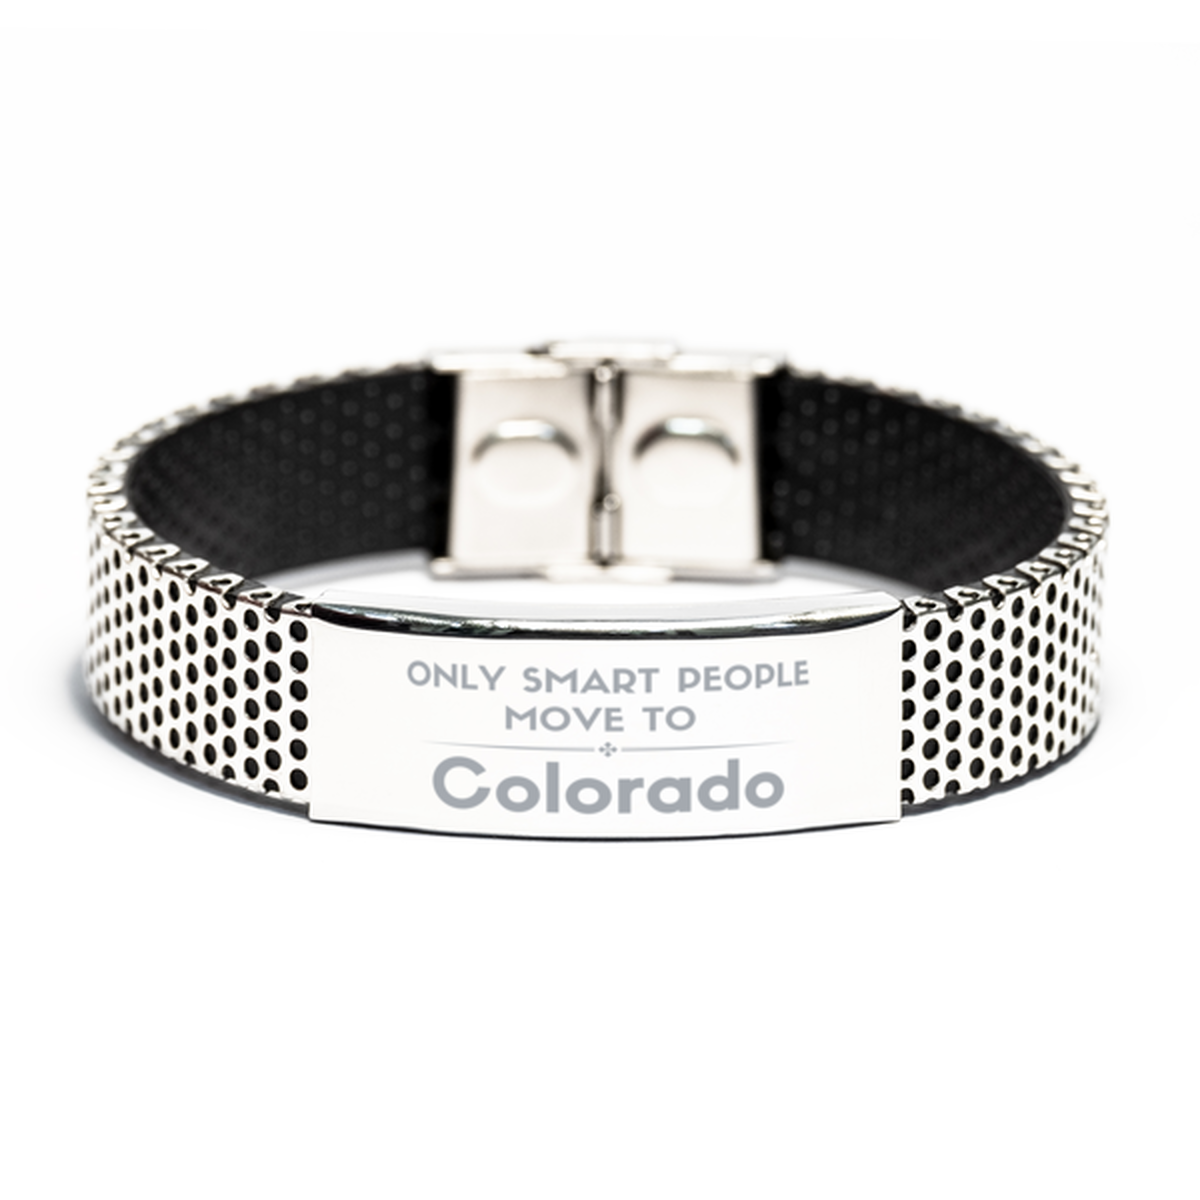 Only smart people move to Colorado Stainless Steel Bracelet, Gag Gifts For Colorado, Move to Colorado Gifts for Friends Coworker Funny Saying Quote